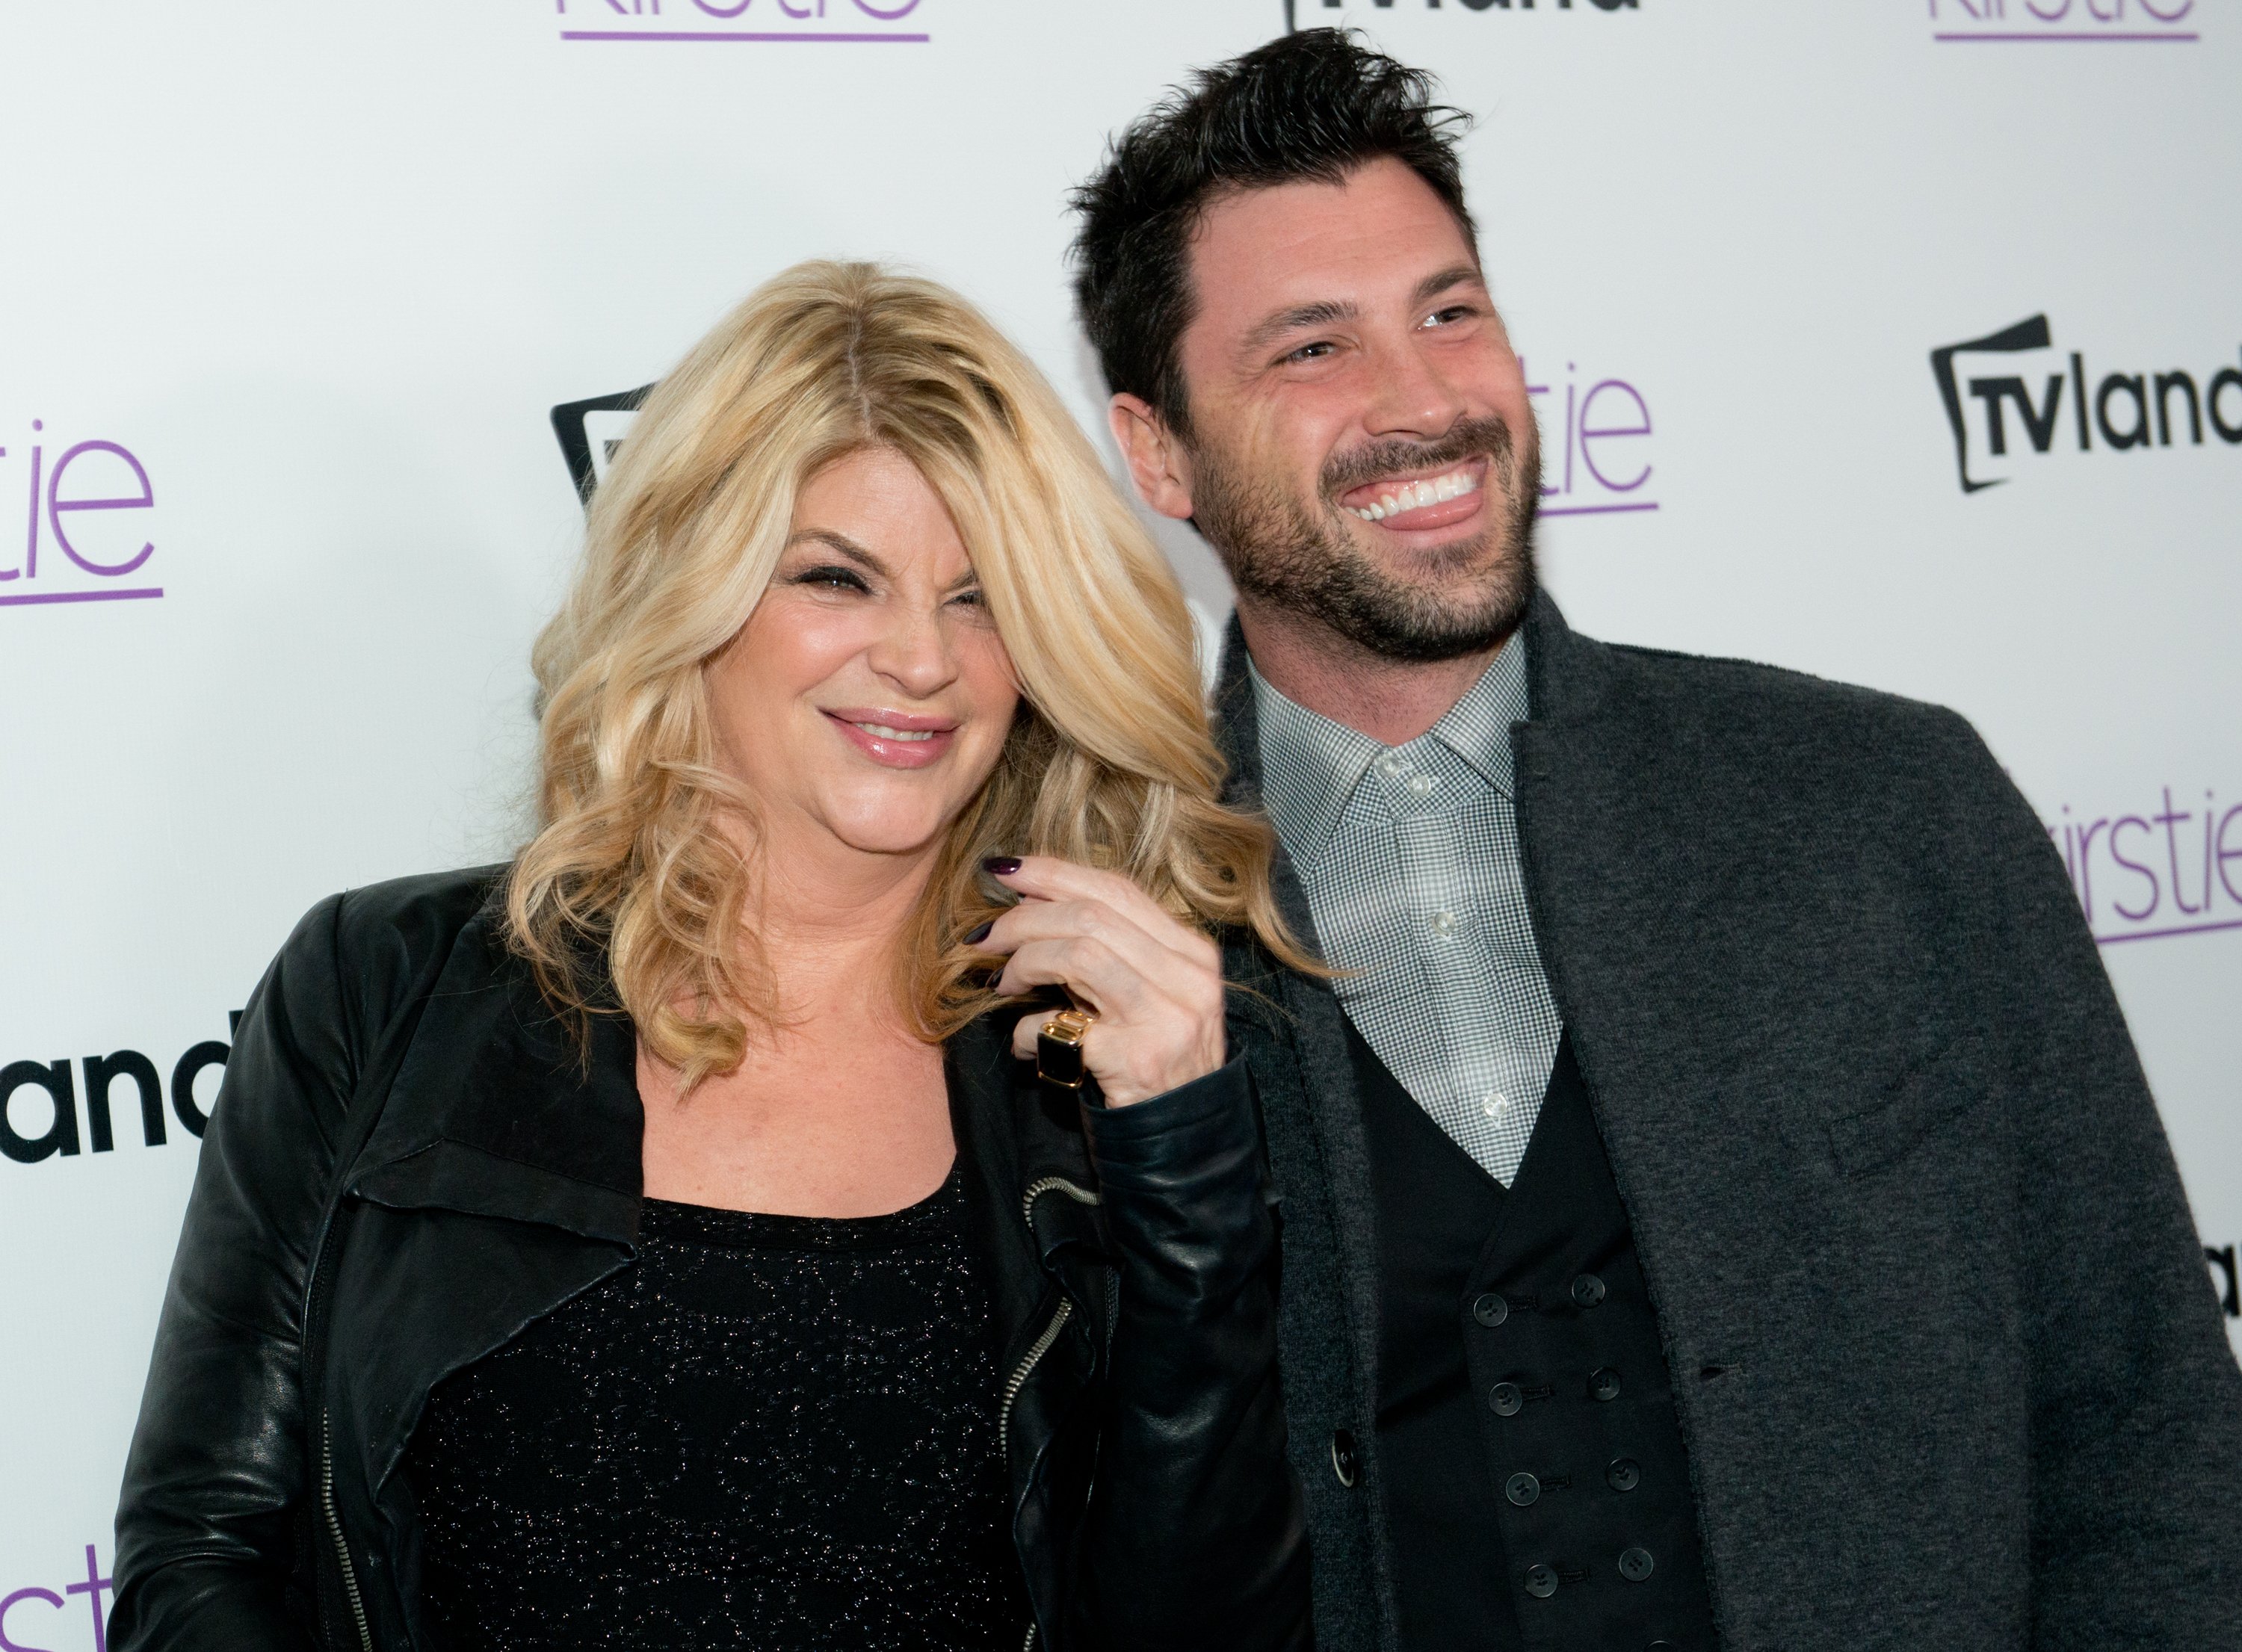 Actress Kirstie Alley and TV personality Maksim Chmerkovskiy on December 3, 2013 in New York City. | Source: Getty Images